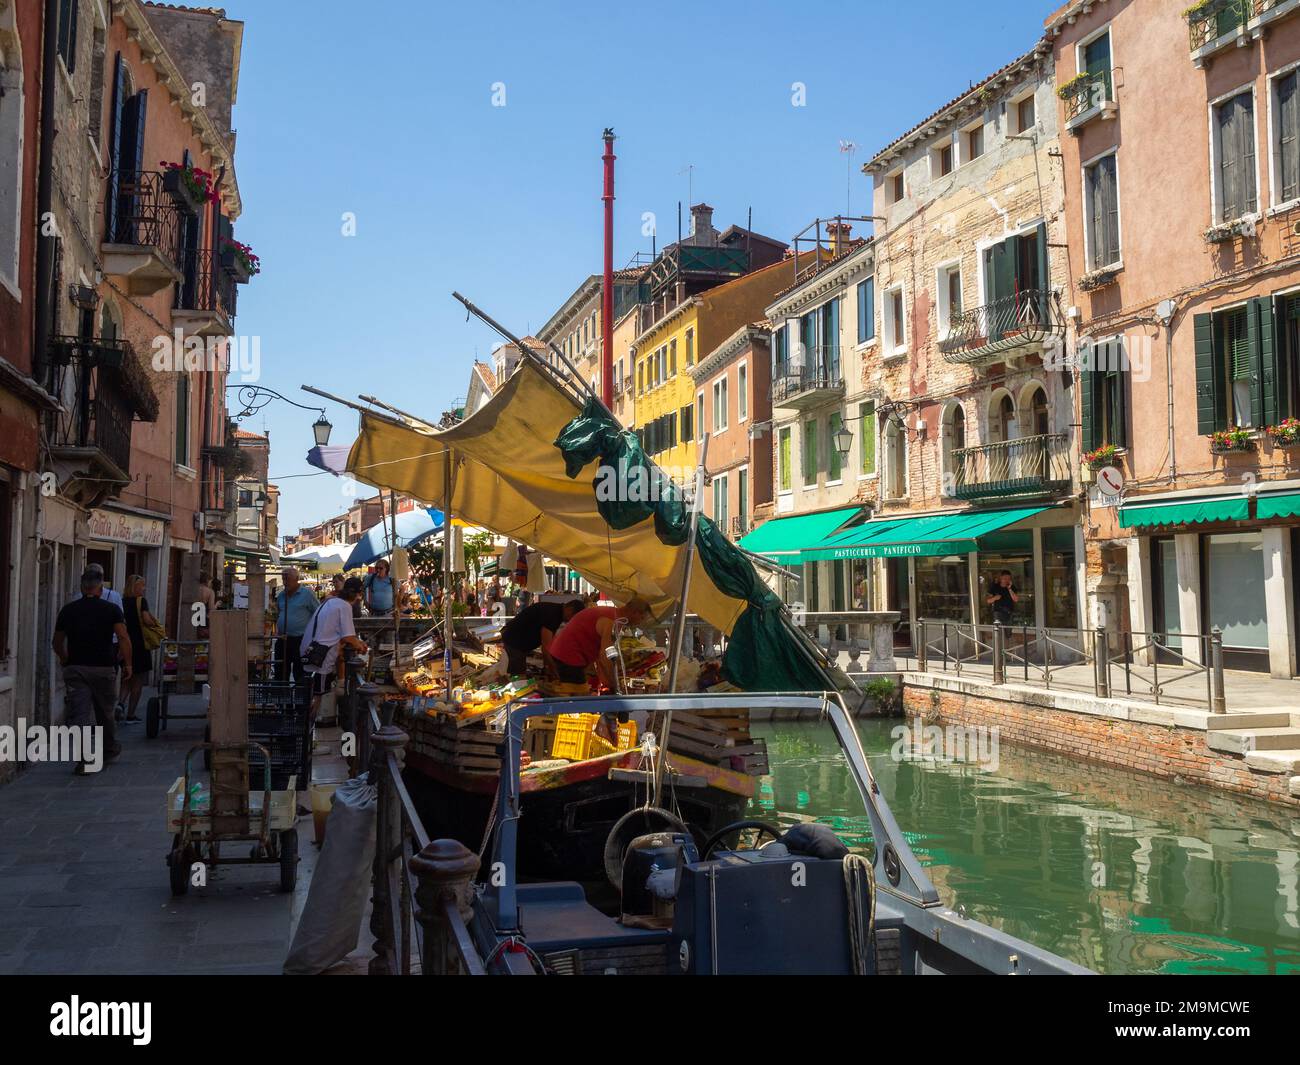 A fruits and vegetables shop in a boat on a canal in Castello, Venice Stock Photo